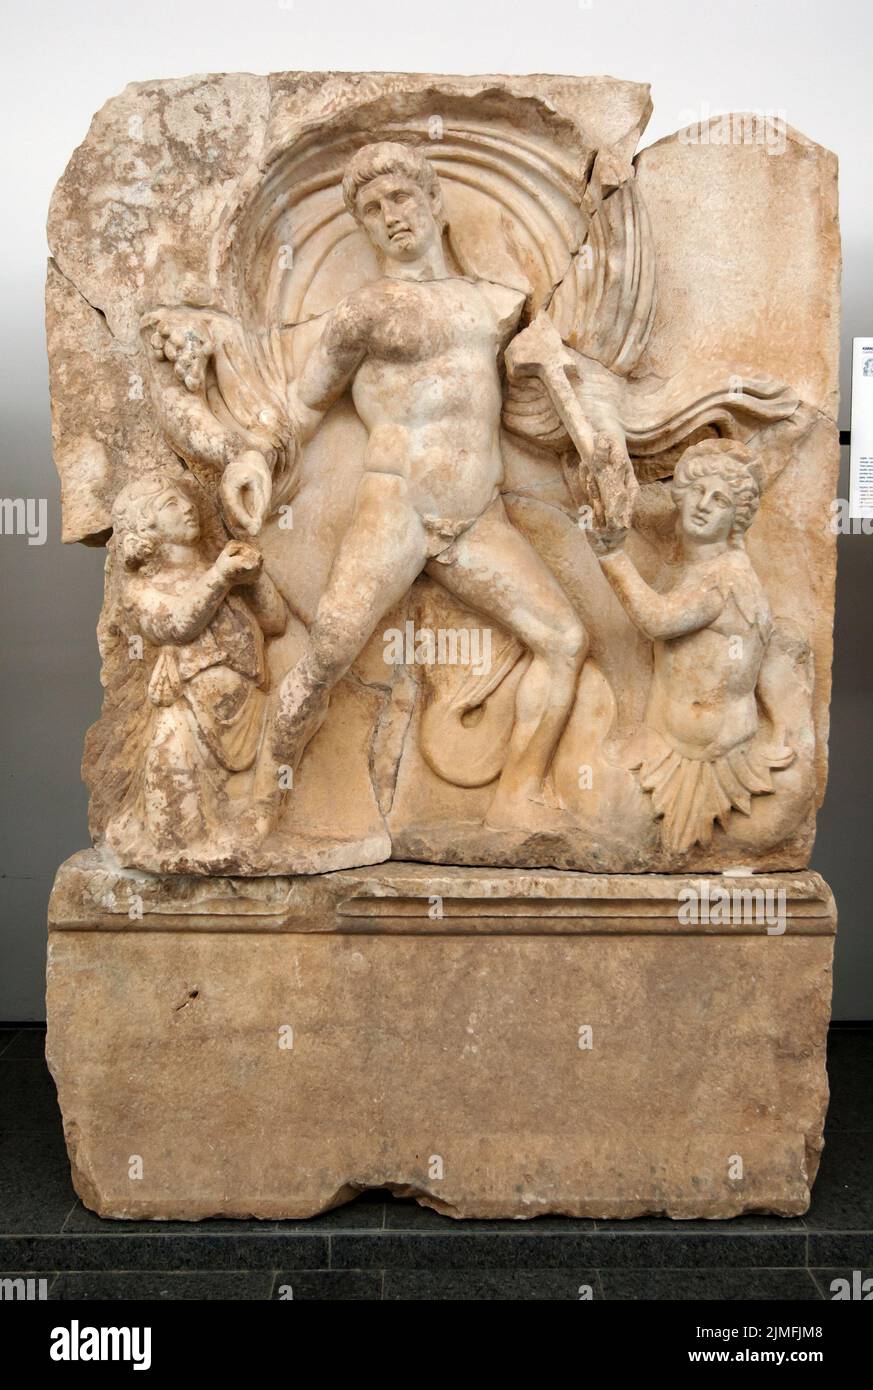 An ancient stone statue within the AphrodIsias Museum in Turkey titled Claudius, Master of Land and Sea. Stock Photo